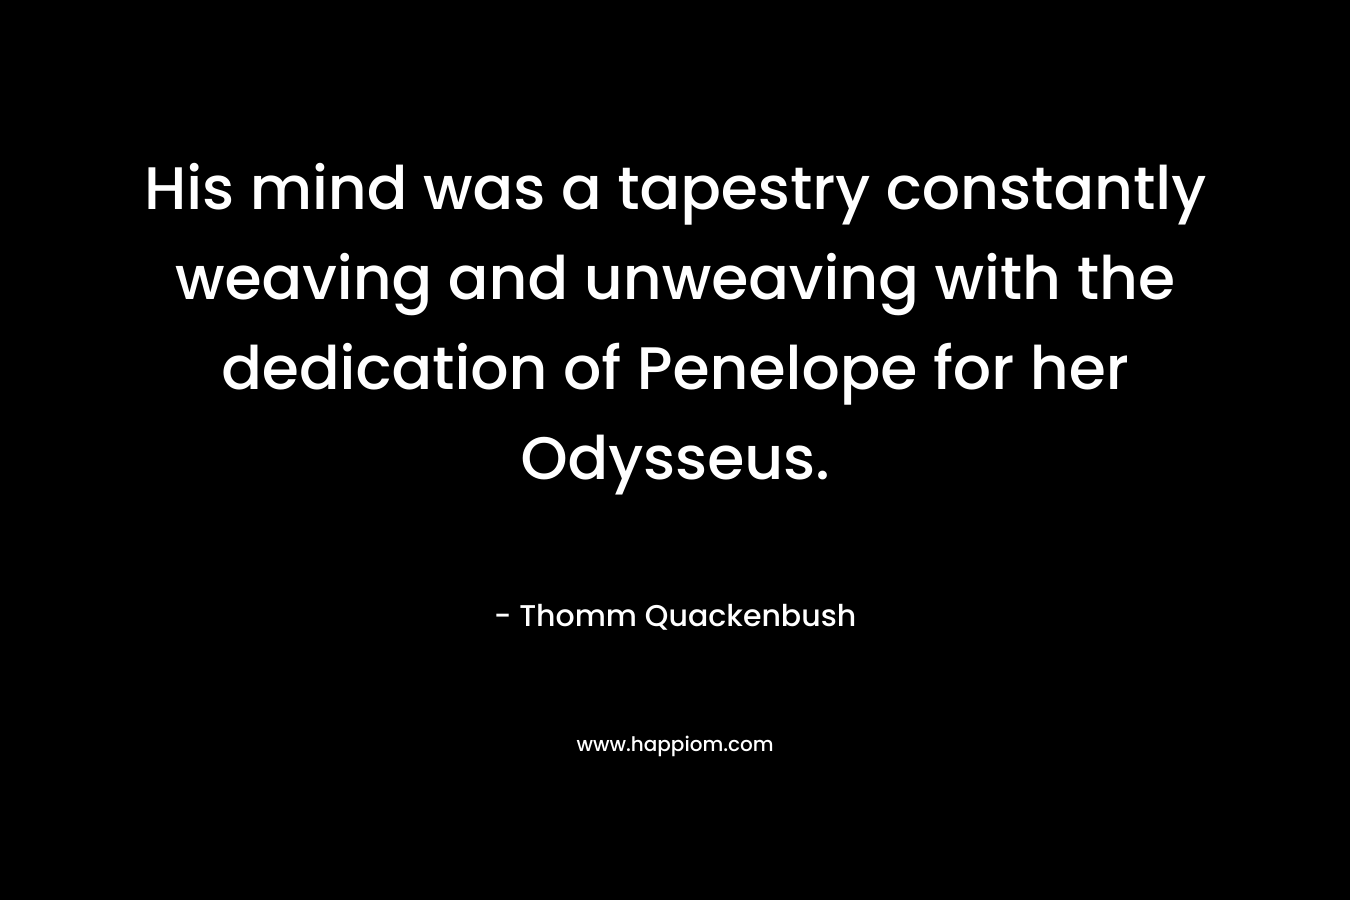 His mind was a tapestry constantly weaving and unweaving with the dedication of Penelope for her Odysseus.